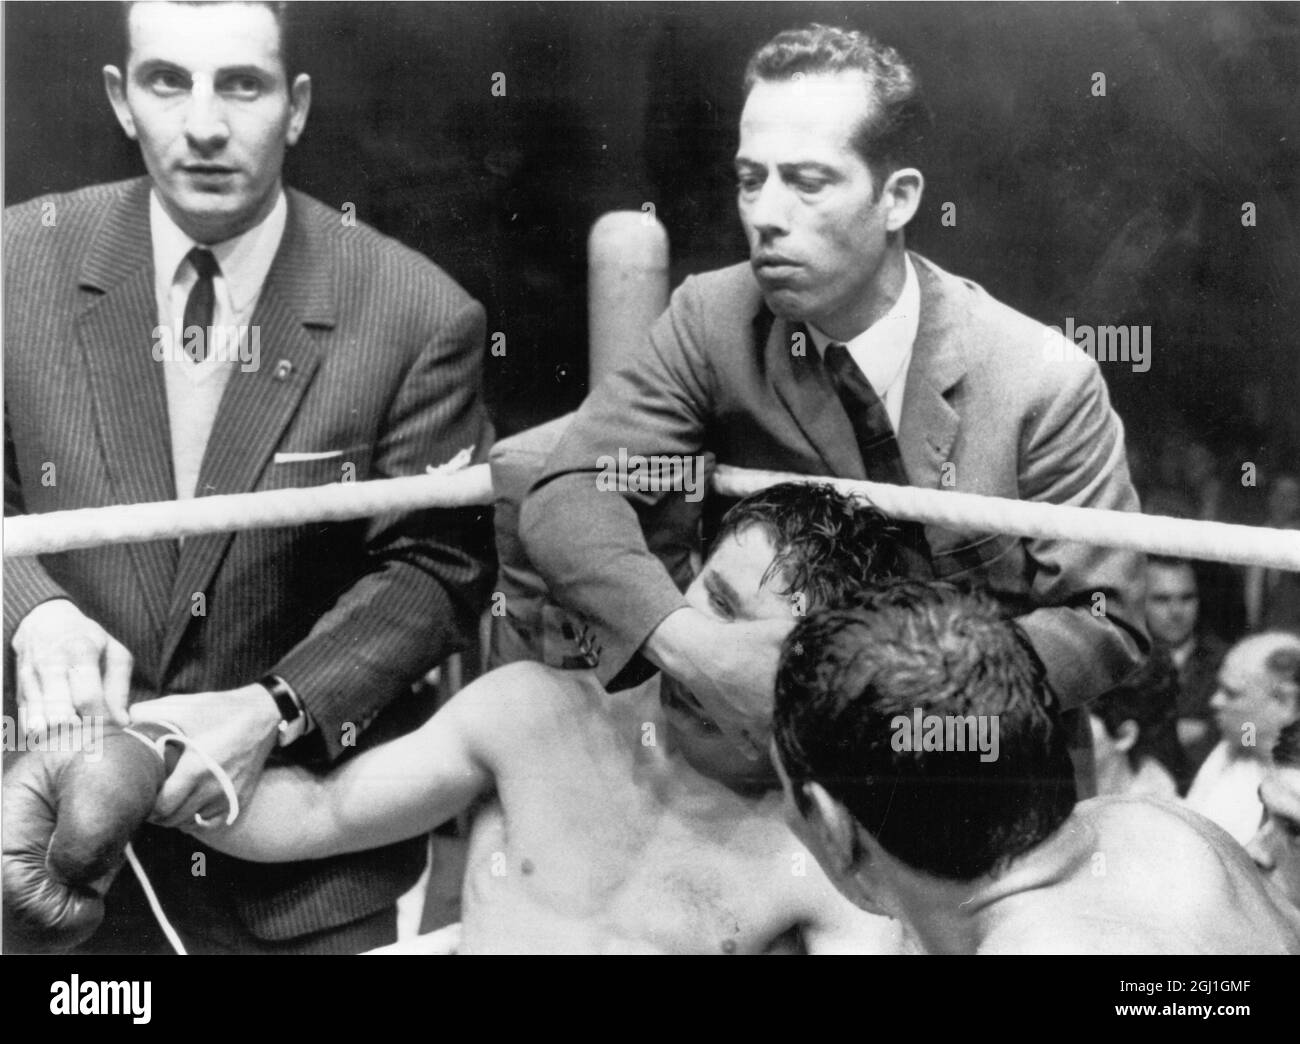 Cologne,Germany: European middleweight boxing champion Carlos Duran of Italy (right) looks on as challenger Jupp Elze of Germany gets treatment in his corner before being rushed to hospital for brain surgery.Duran had just been awarded the fight on a technical knock-out. 14 June 1968 Stock Photo